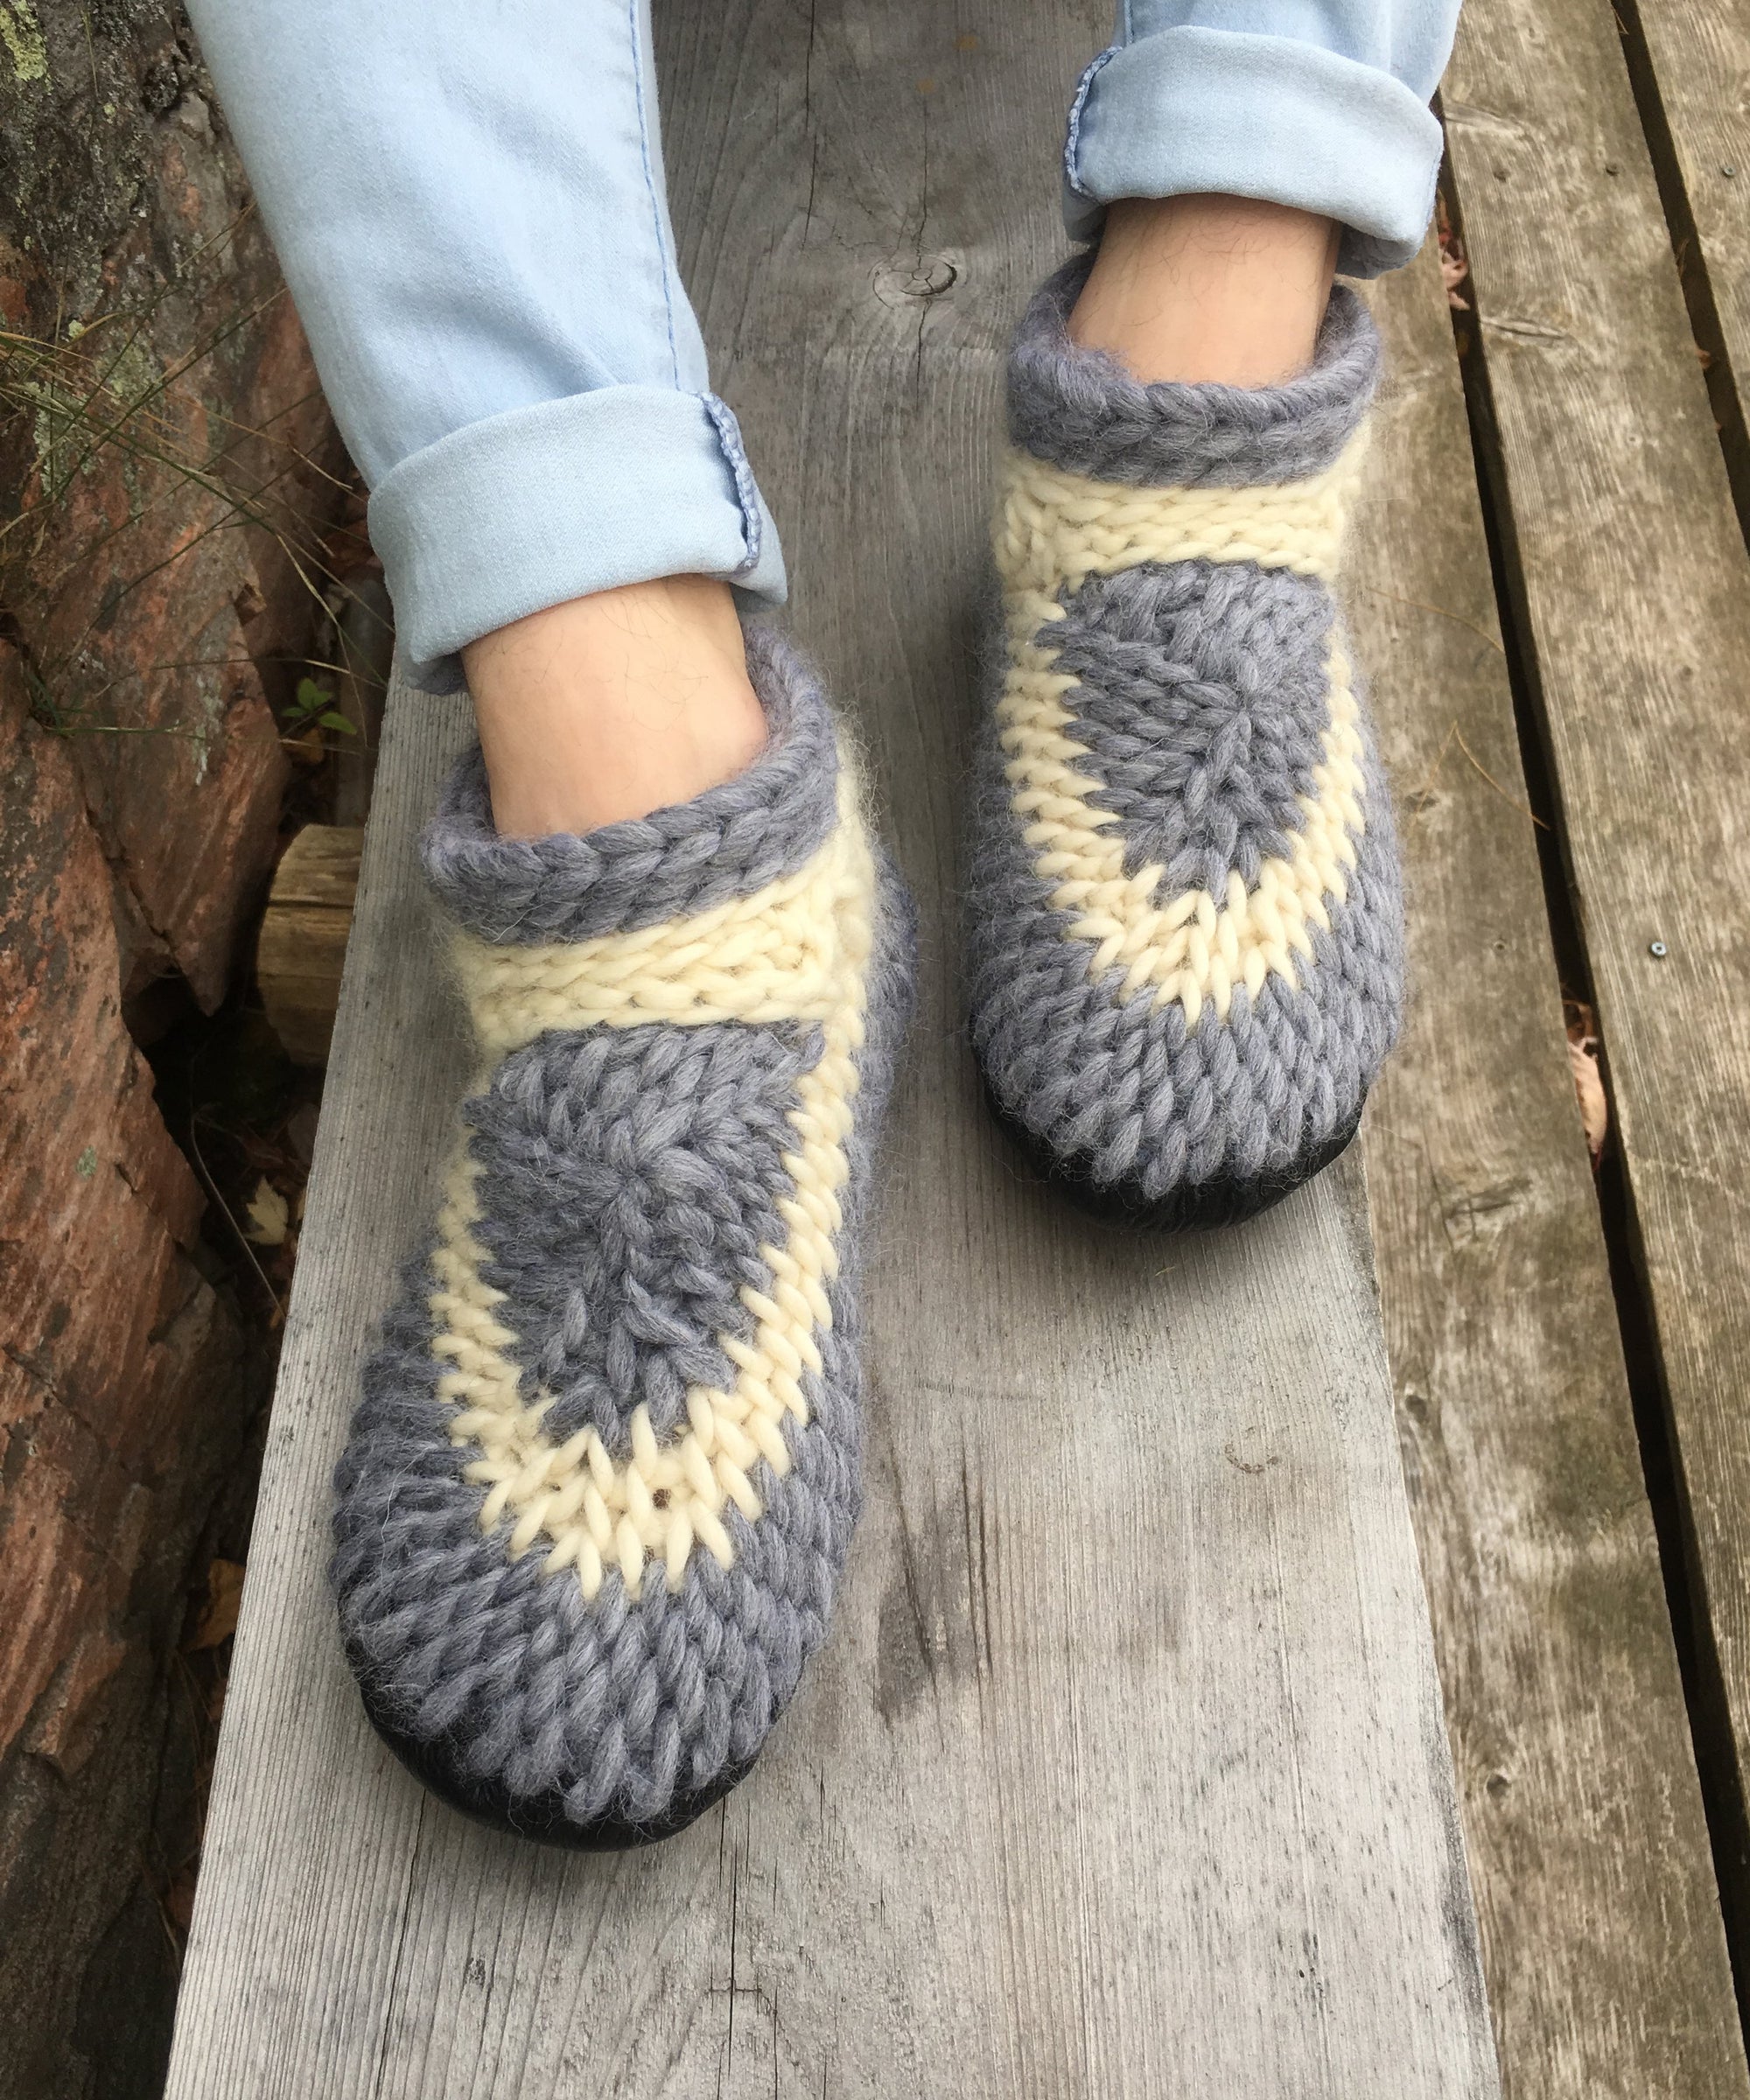 Knitted Slippers with Leather Soles in a Soft Gray and White